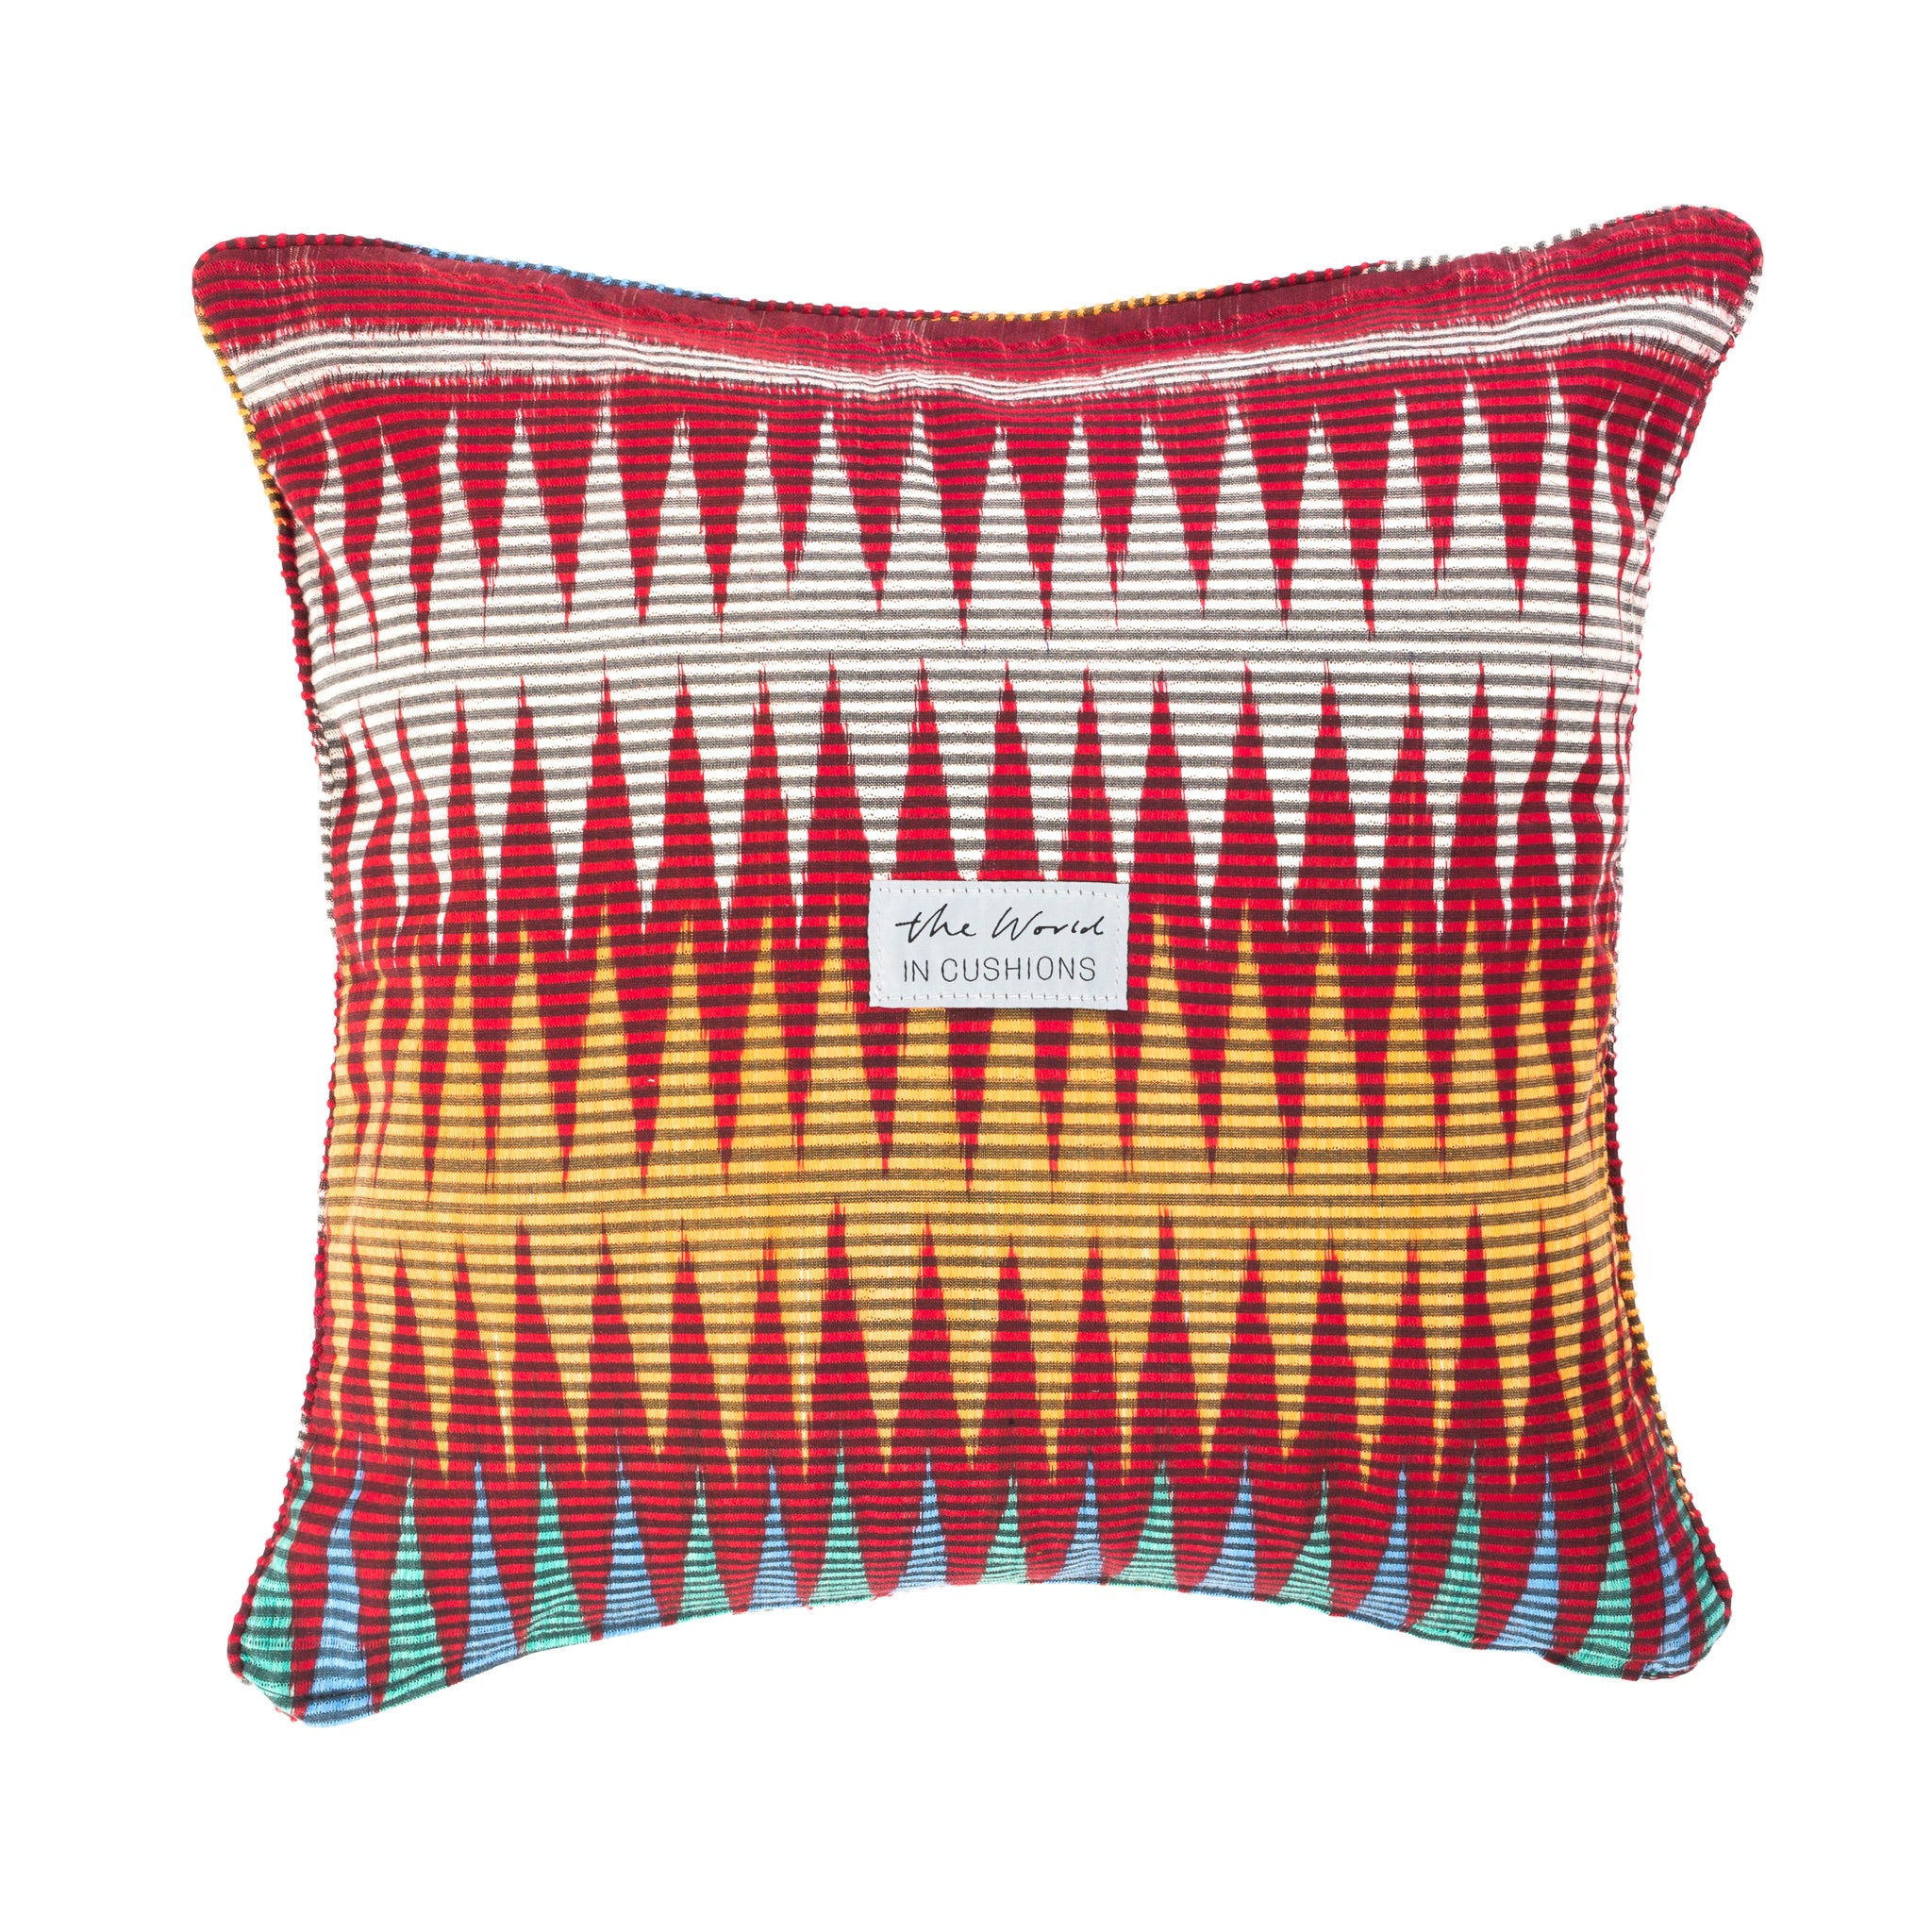 Burgundy Red, White and Yellow Patterned Square Scatter Ikat Cushion from Bali - BACK